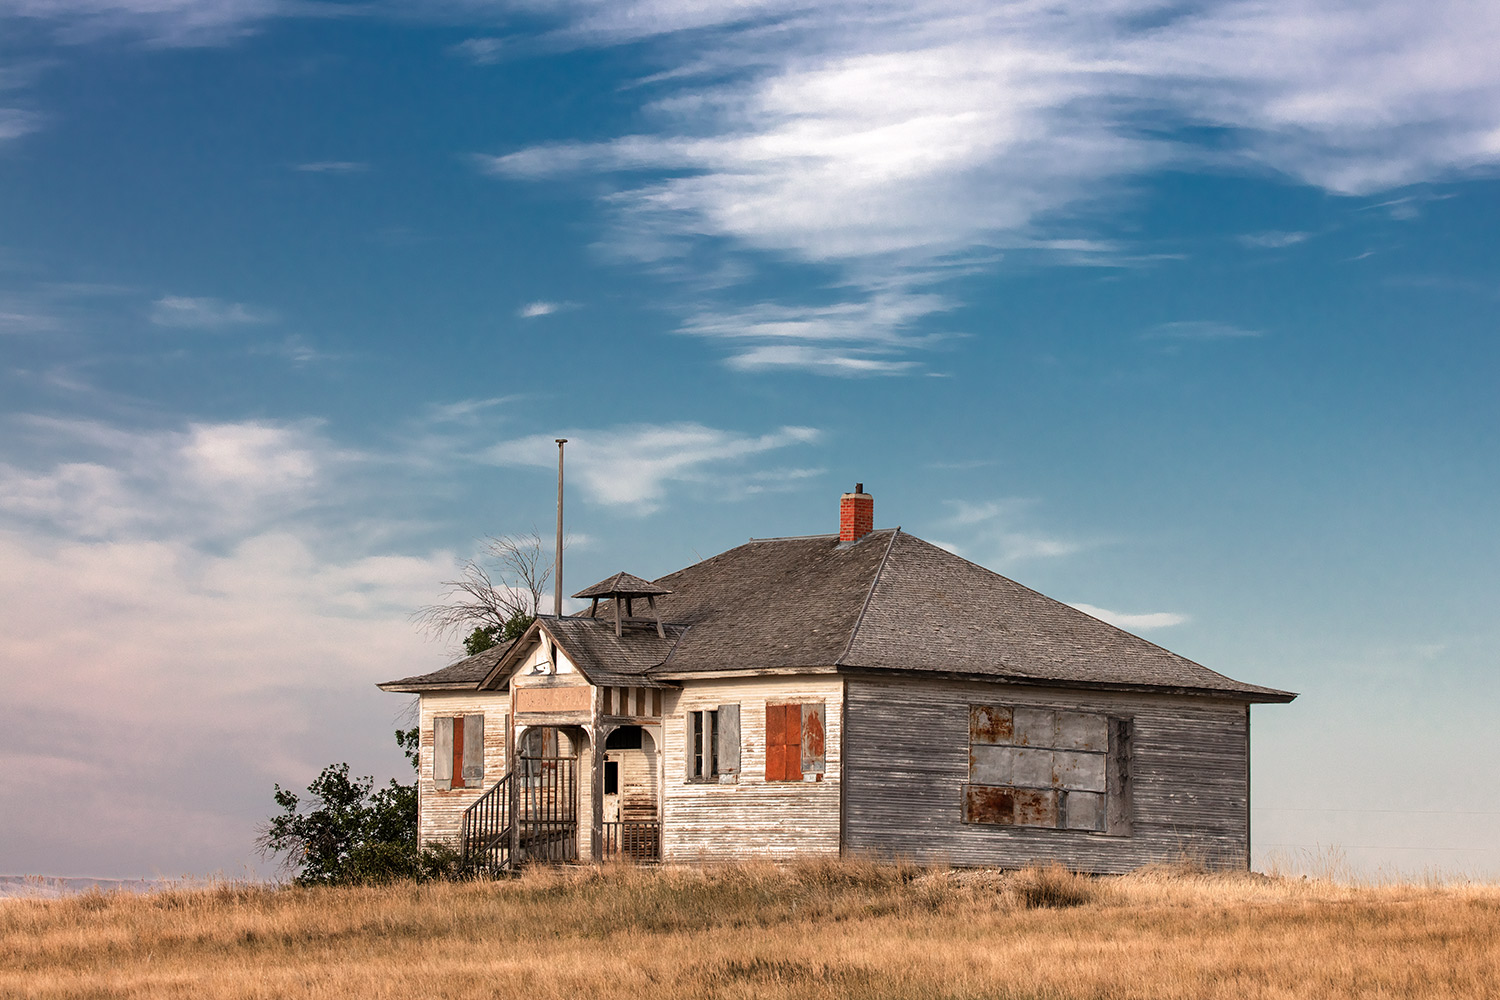 The old abandoned schoolhouse in Collins, Montana.&nbsp;→ Buy a Print&nbsp;or&nbsp;License Photo